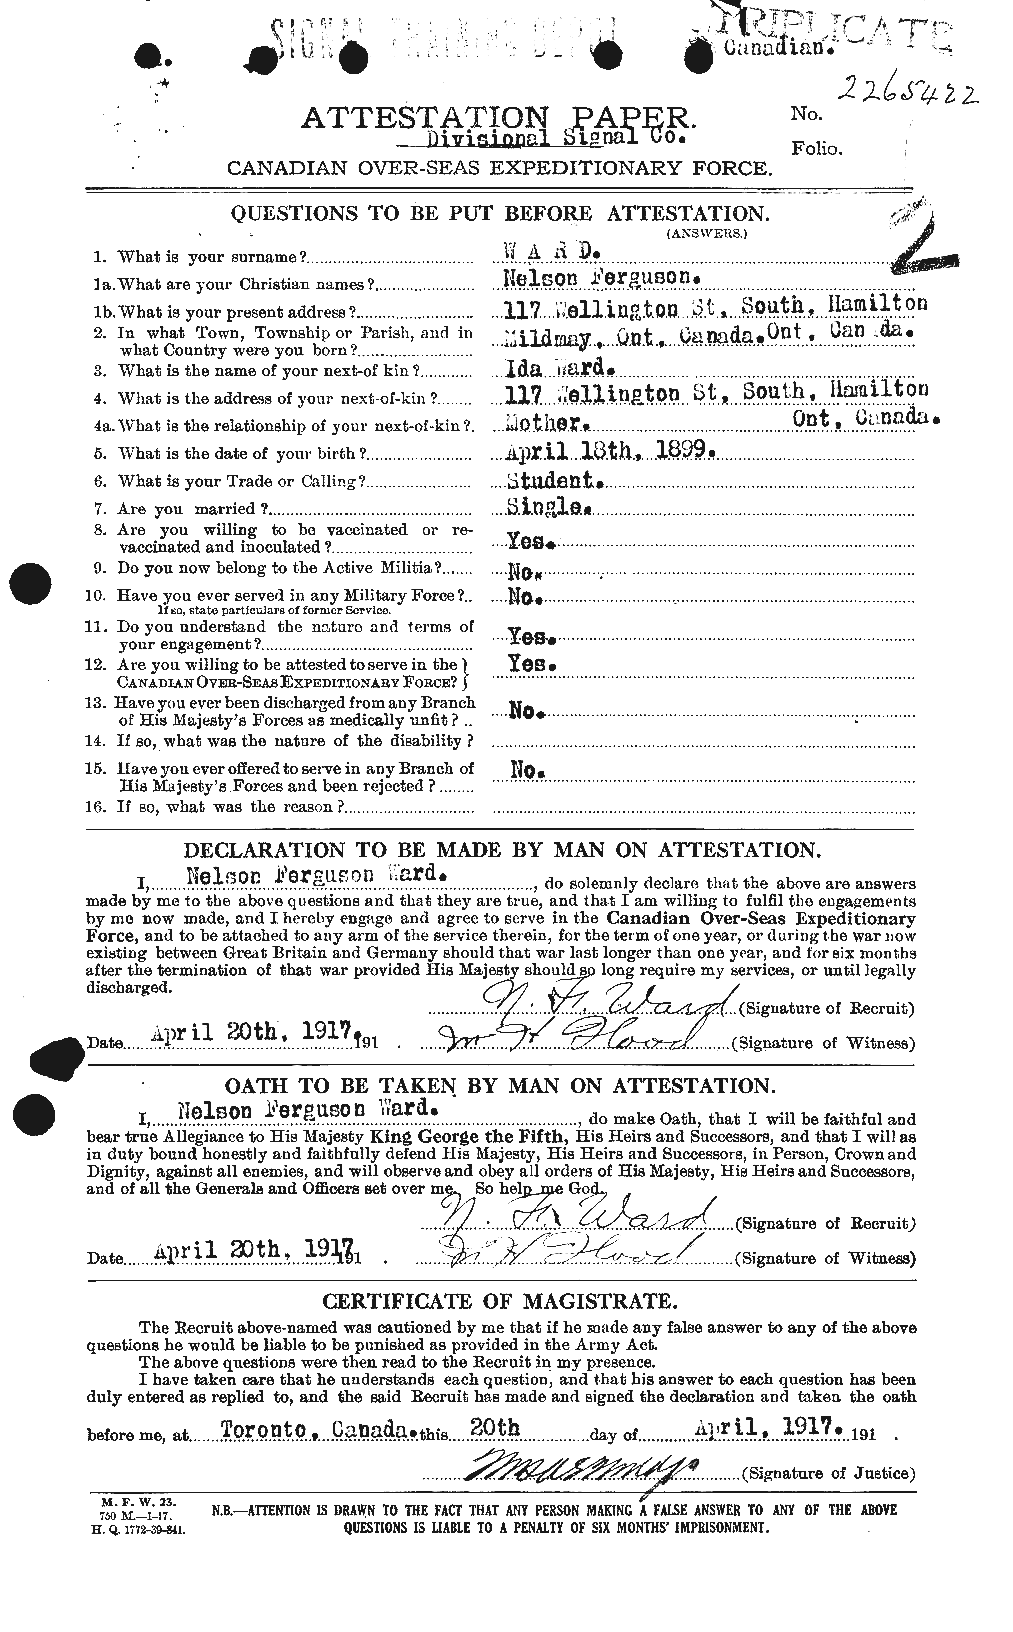 Personnel Records of the First World War - CEF 659609a